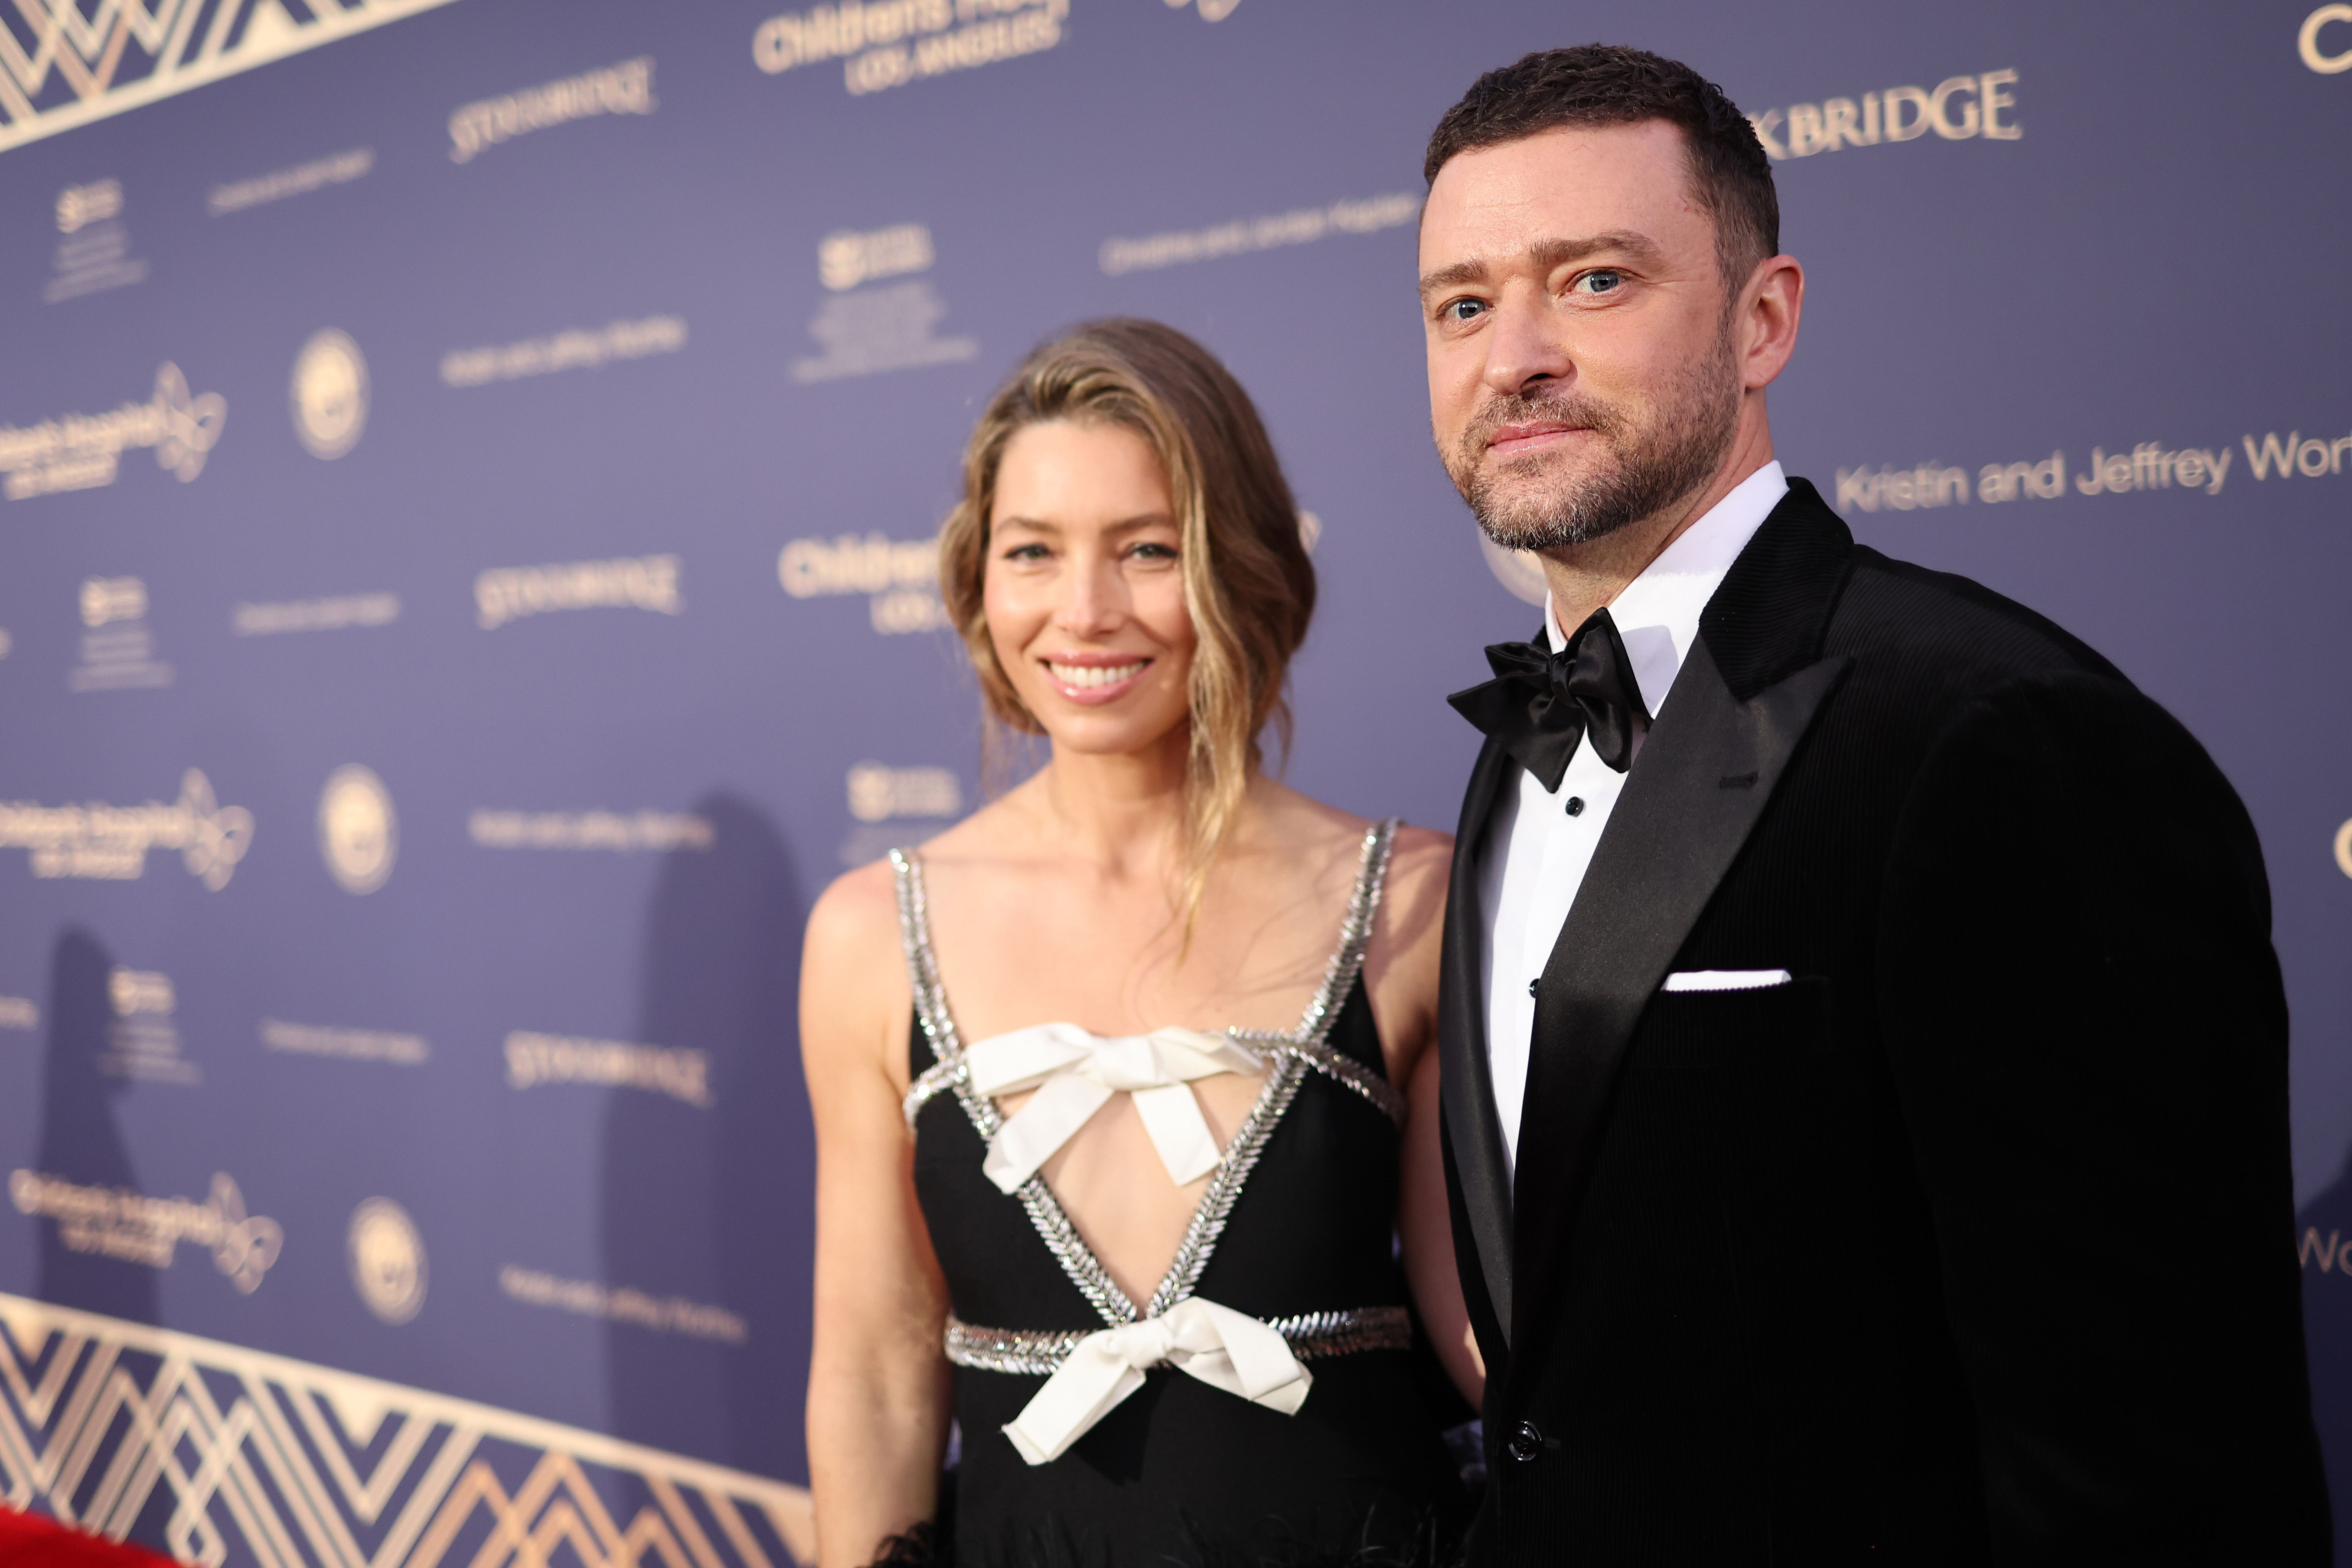 See How Much Justin Timberlake's Style Has Evolved Over the Years